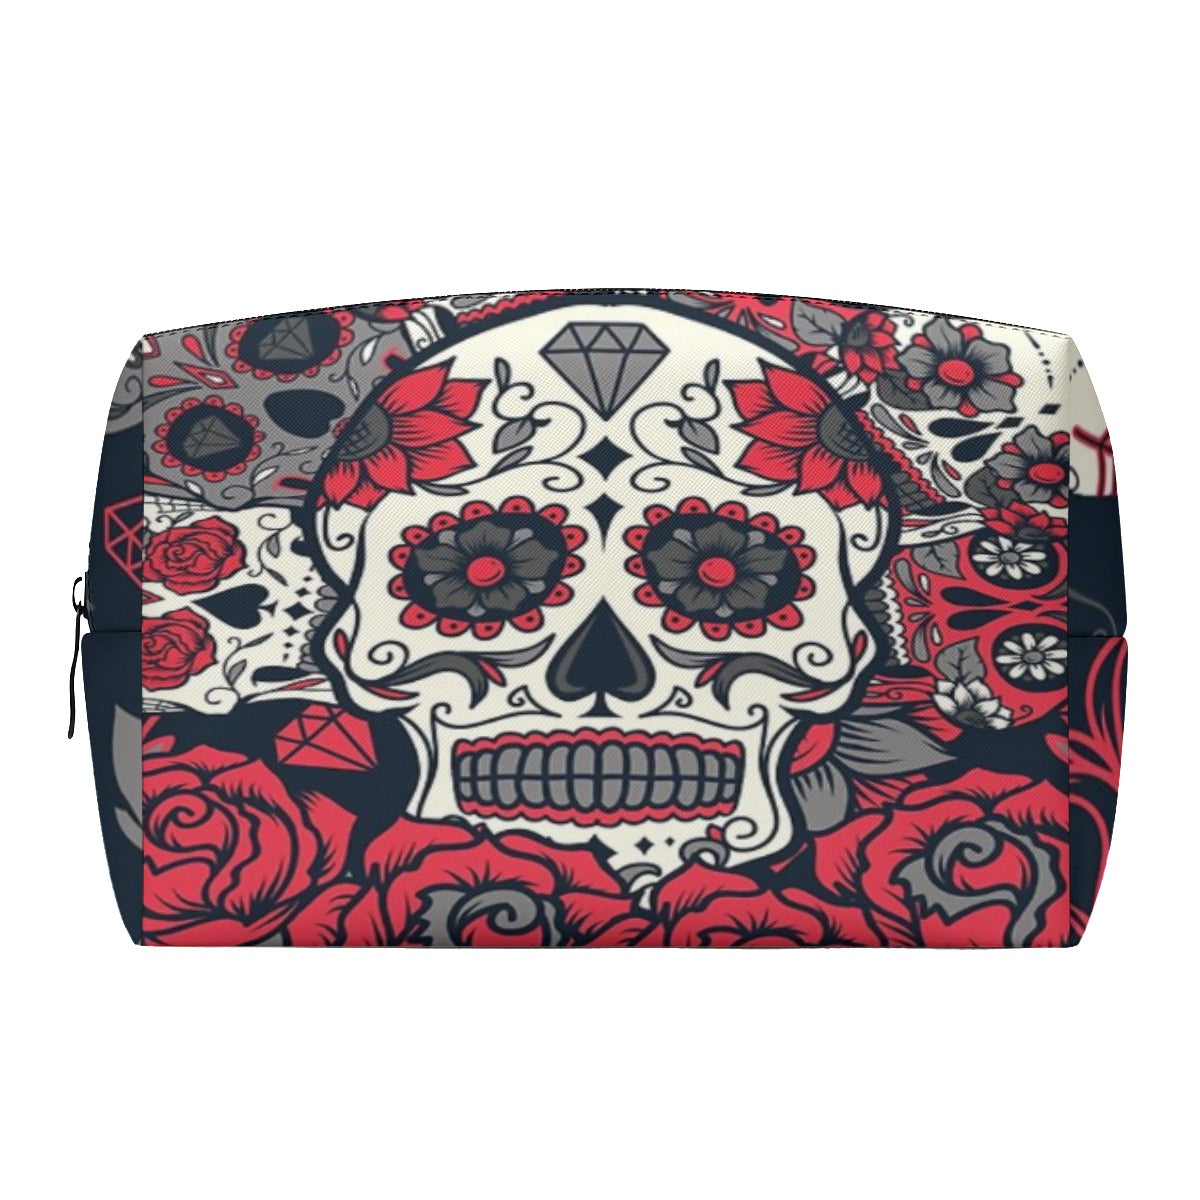 Sugar skull Day of the dead Cosmetic Bag, Mexican skeleton skull cosmetic bag purse wallet